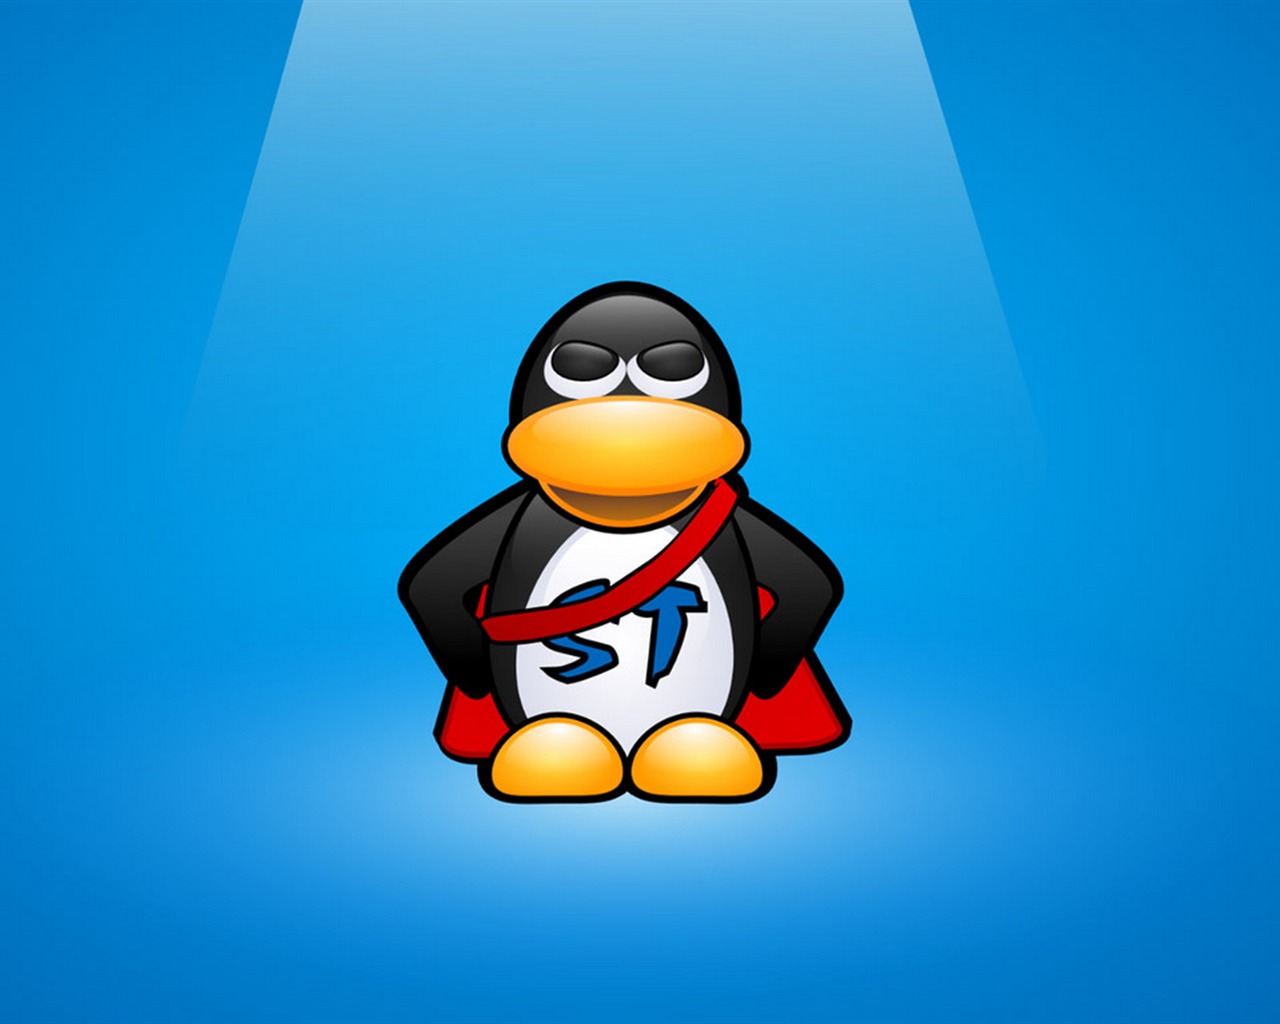 Linux tapety (3) #1 - 1280x1024